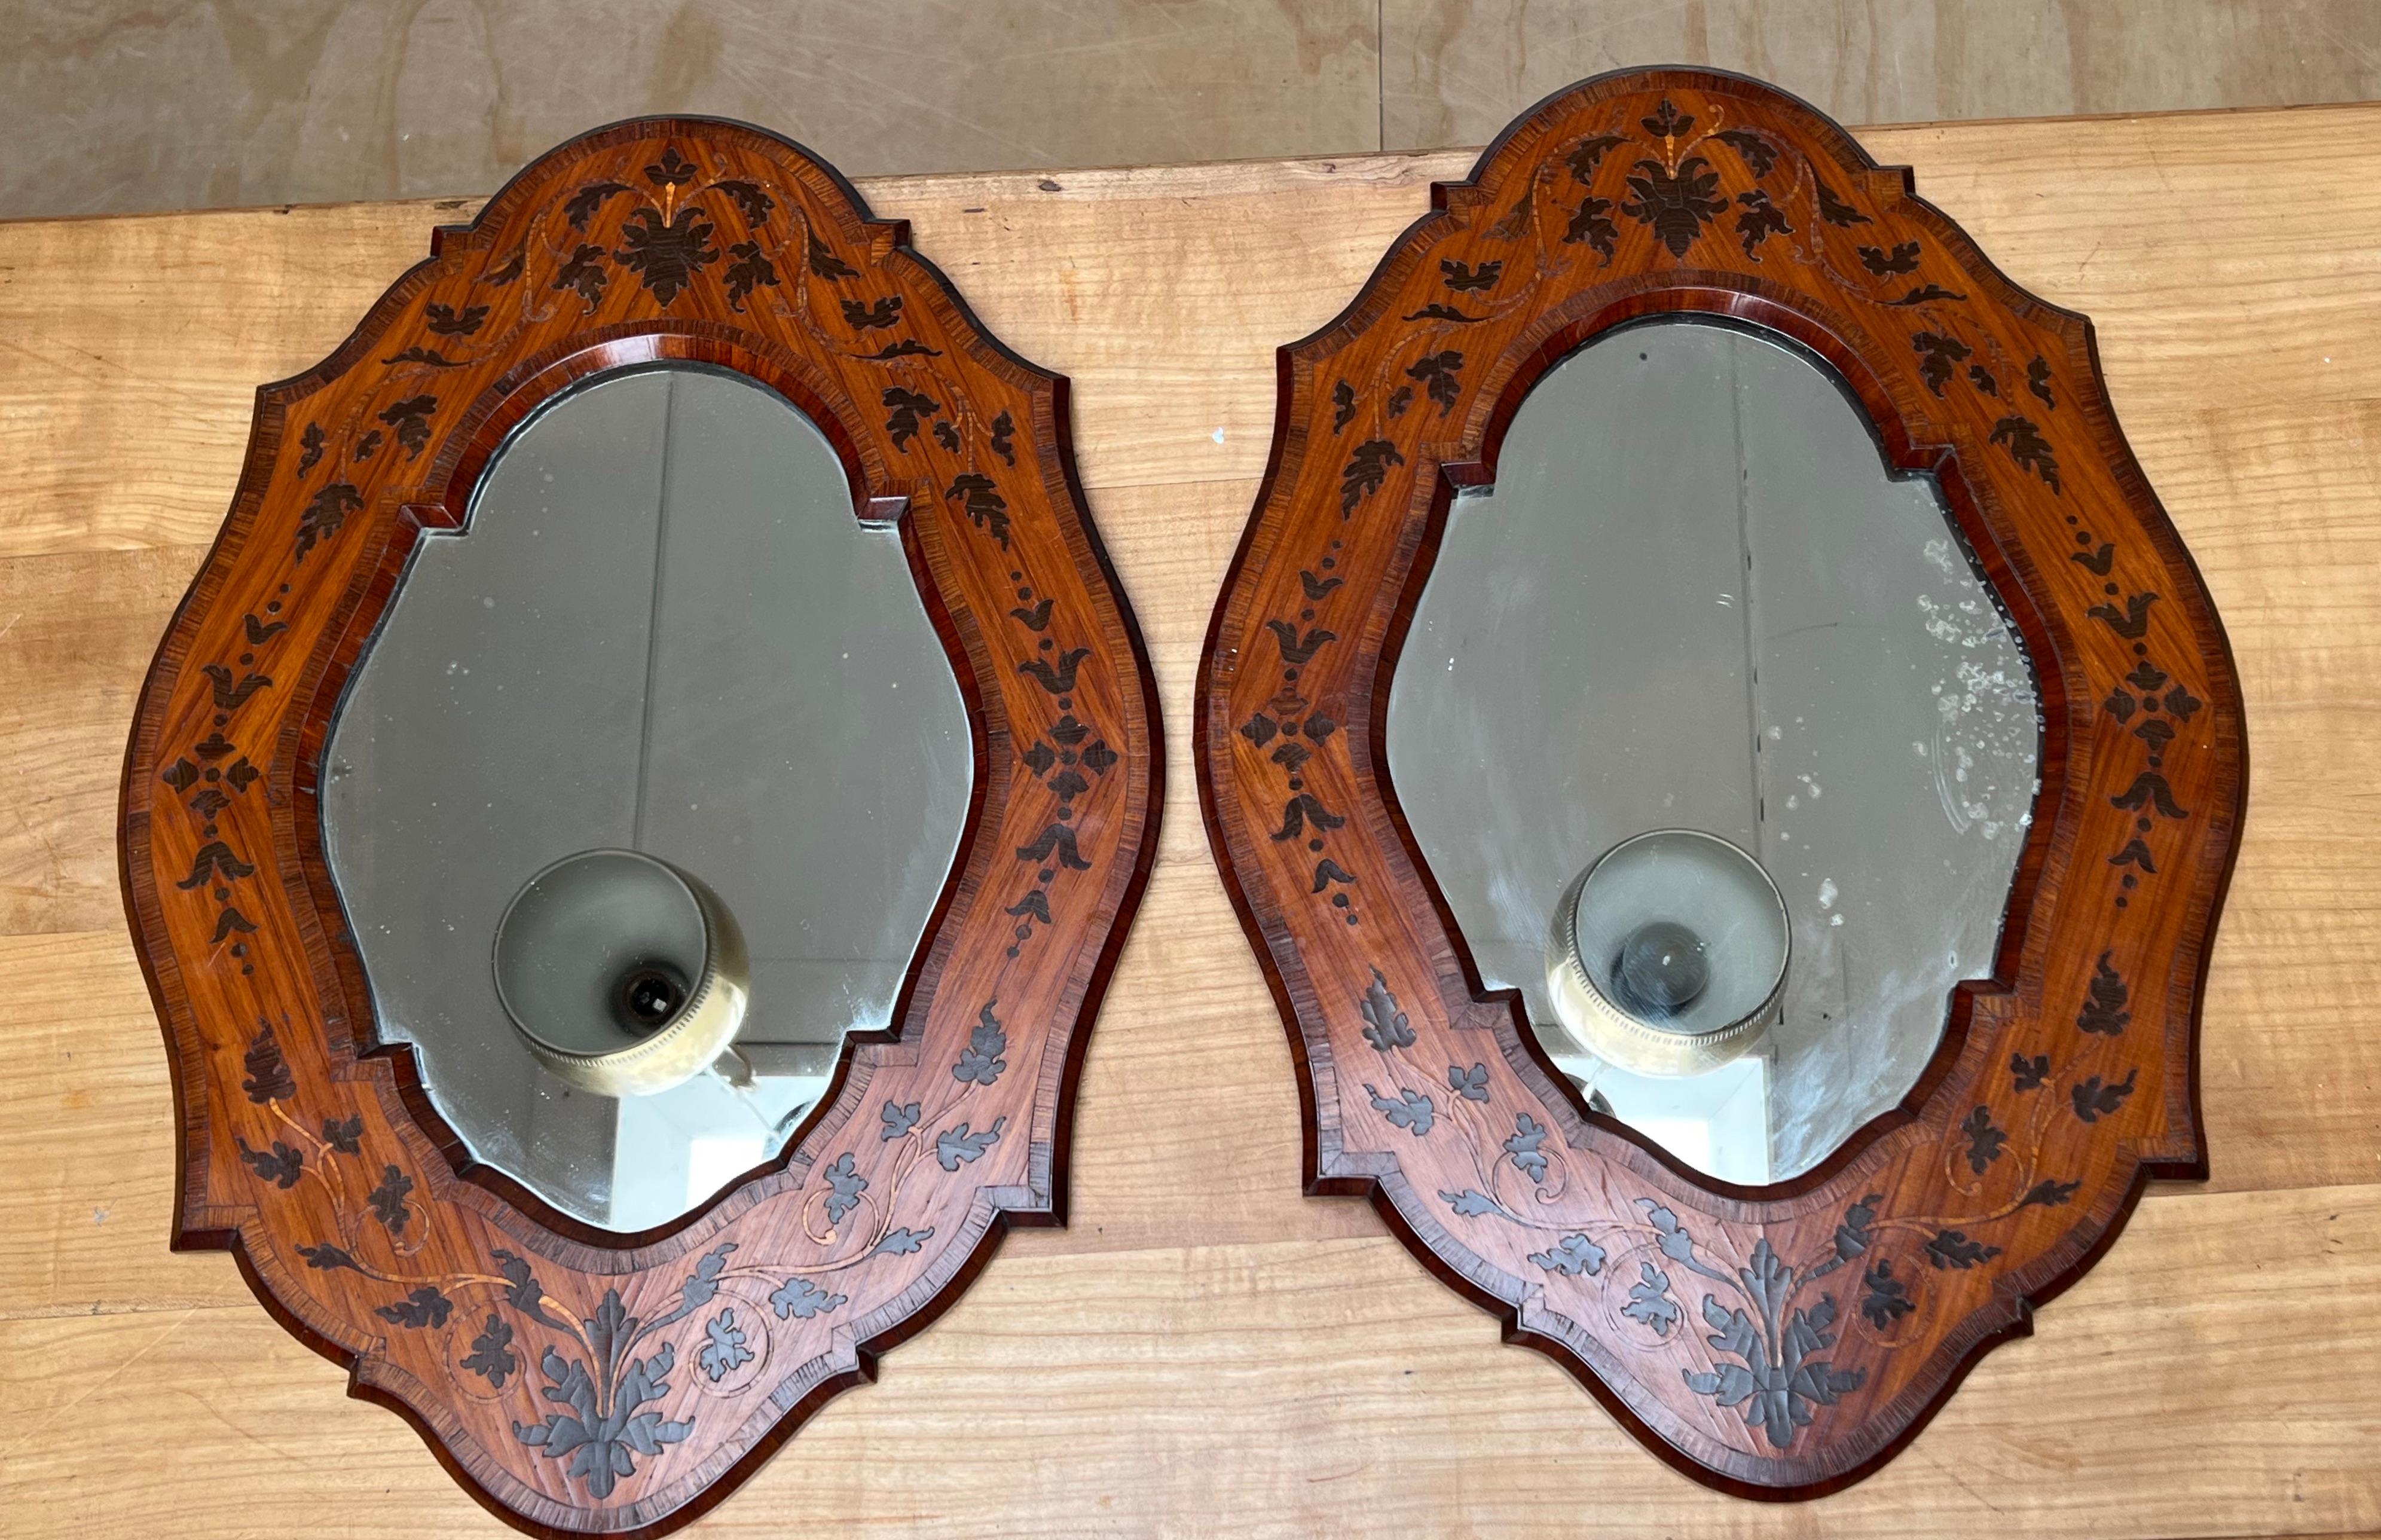 Outstanding shape, good size and great quality set of two hand crafted wall mirrors.

Finding one stylish and very good condition antique is great, but finding a stunning pair is always extra special. This remarkably designed and top quality